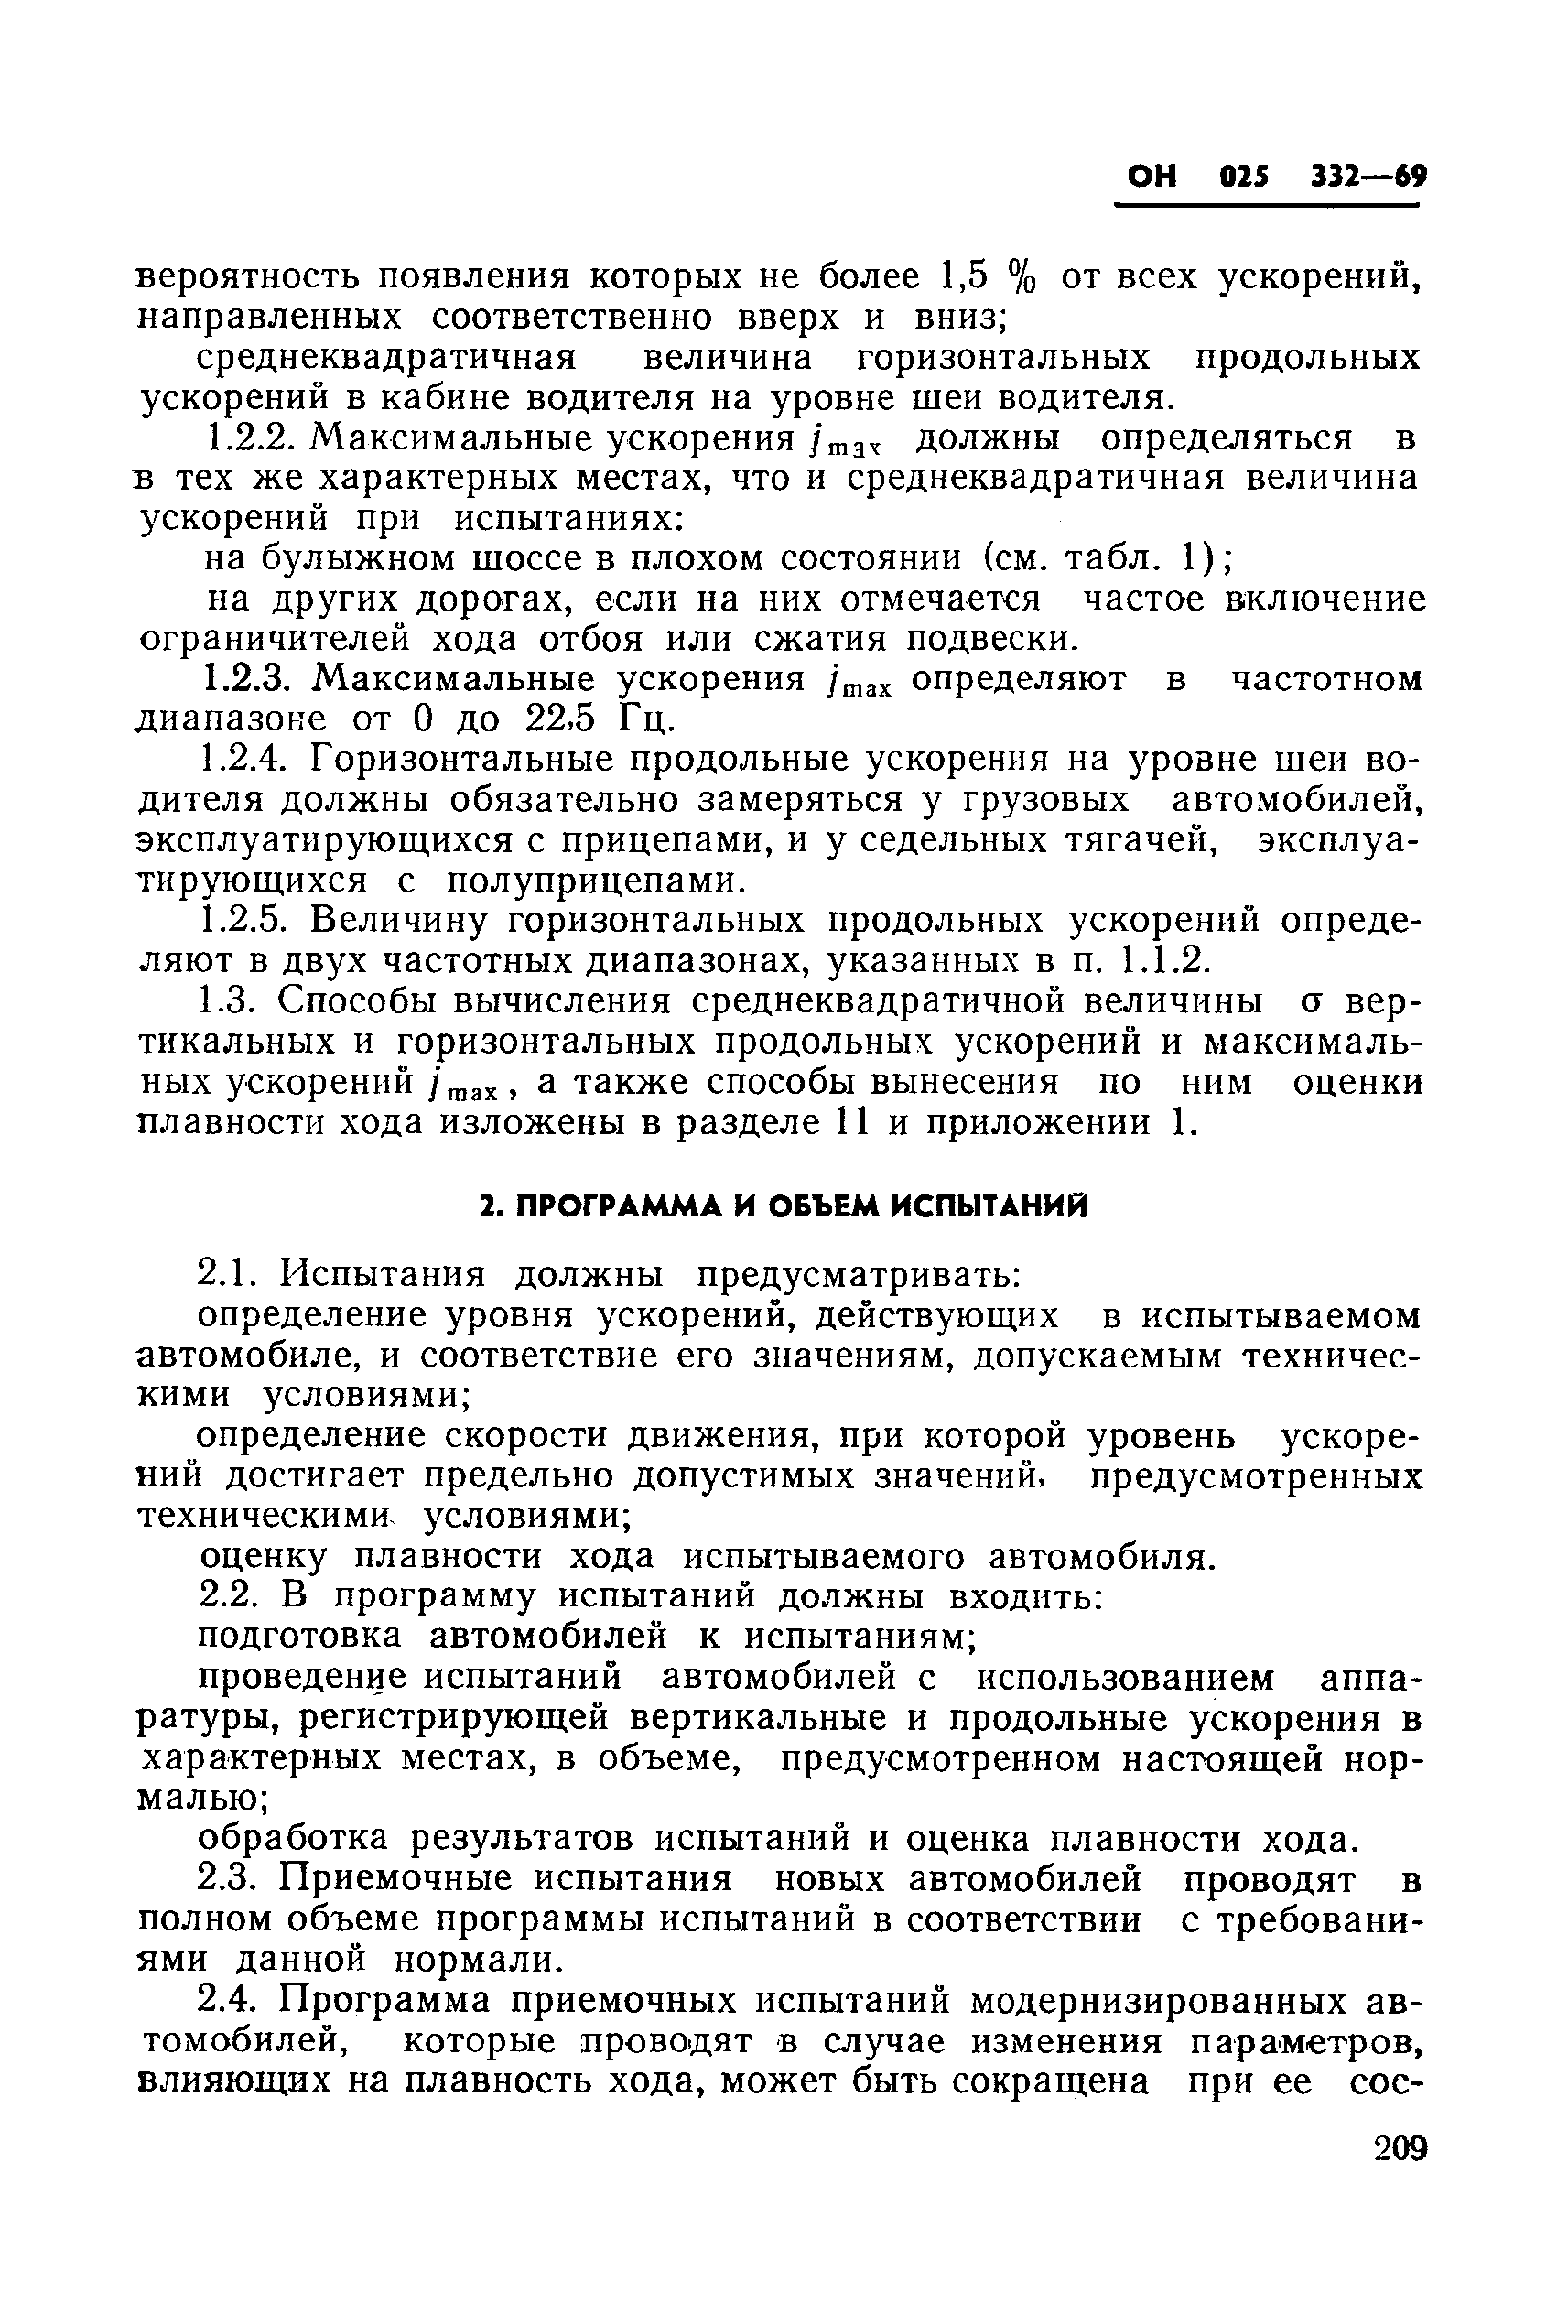 ОН 025 332-69